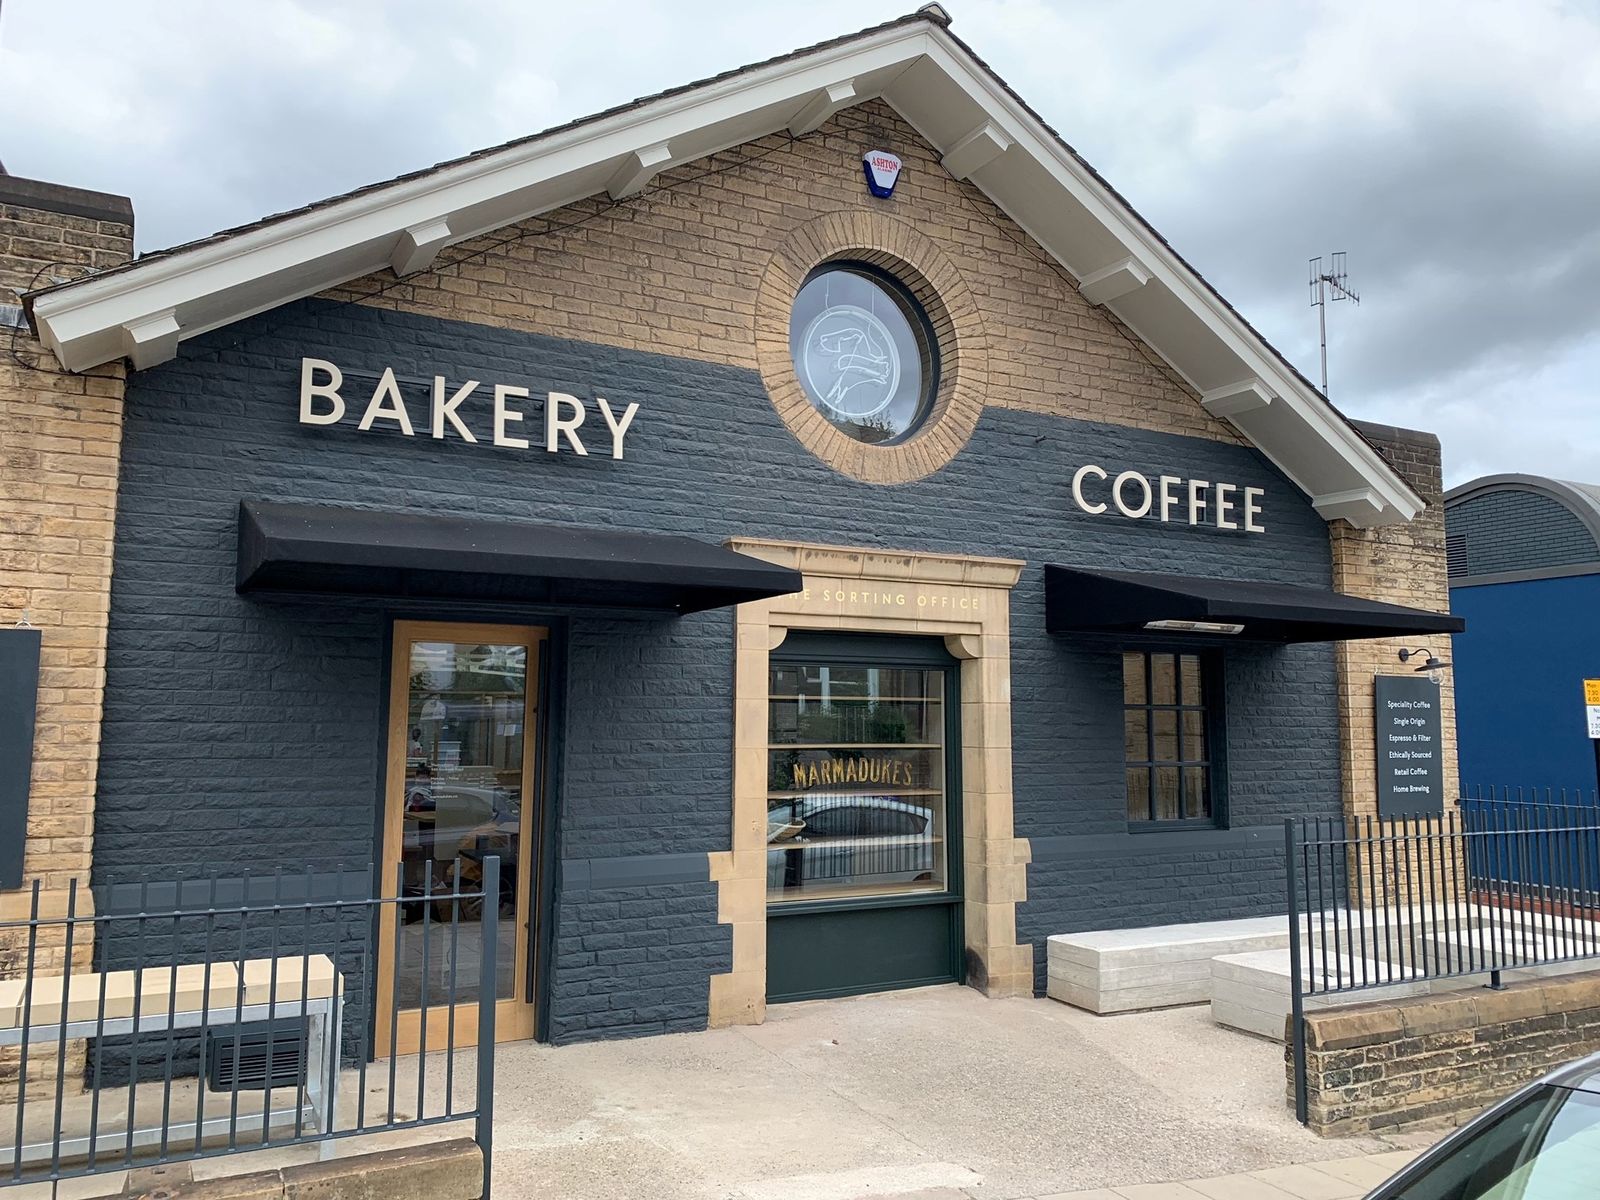 Popular Sheffield cafe launches third site as lockdown eases